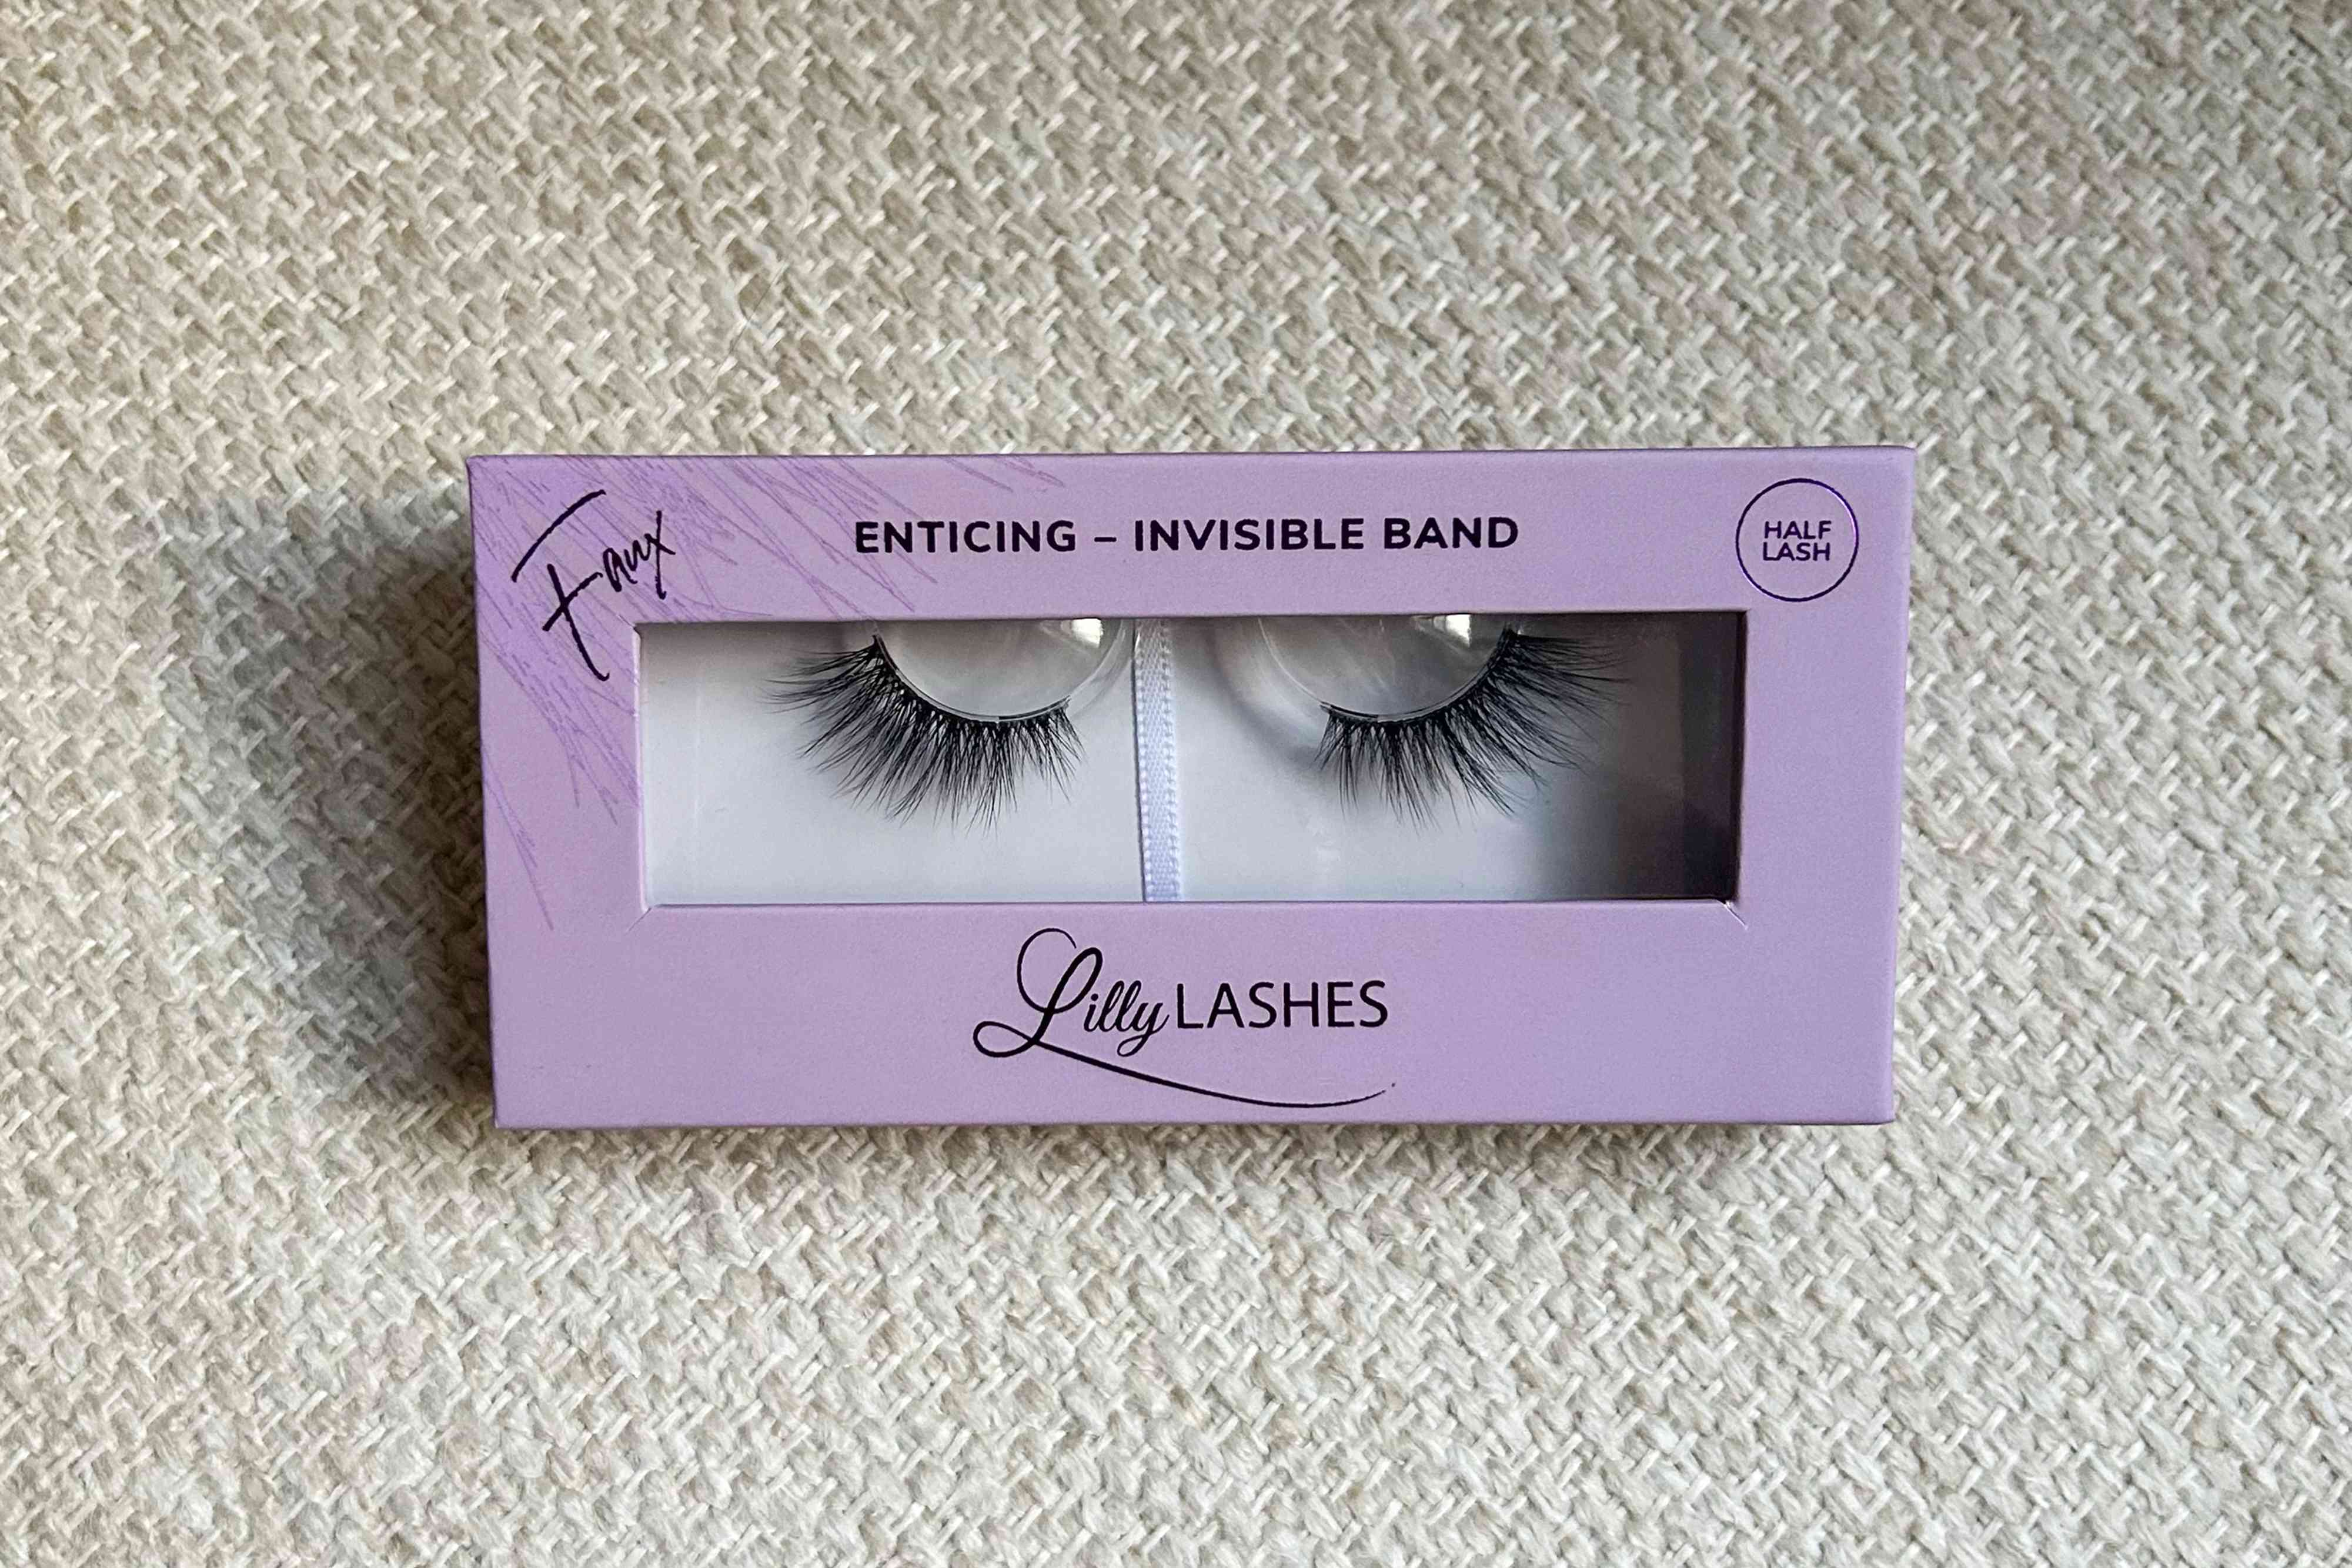 Lilly Lashes Enticing Sheer Band Half-Lash on a flat patterned surface